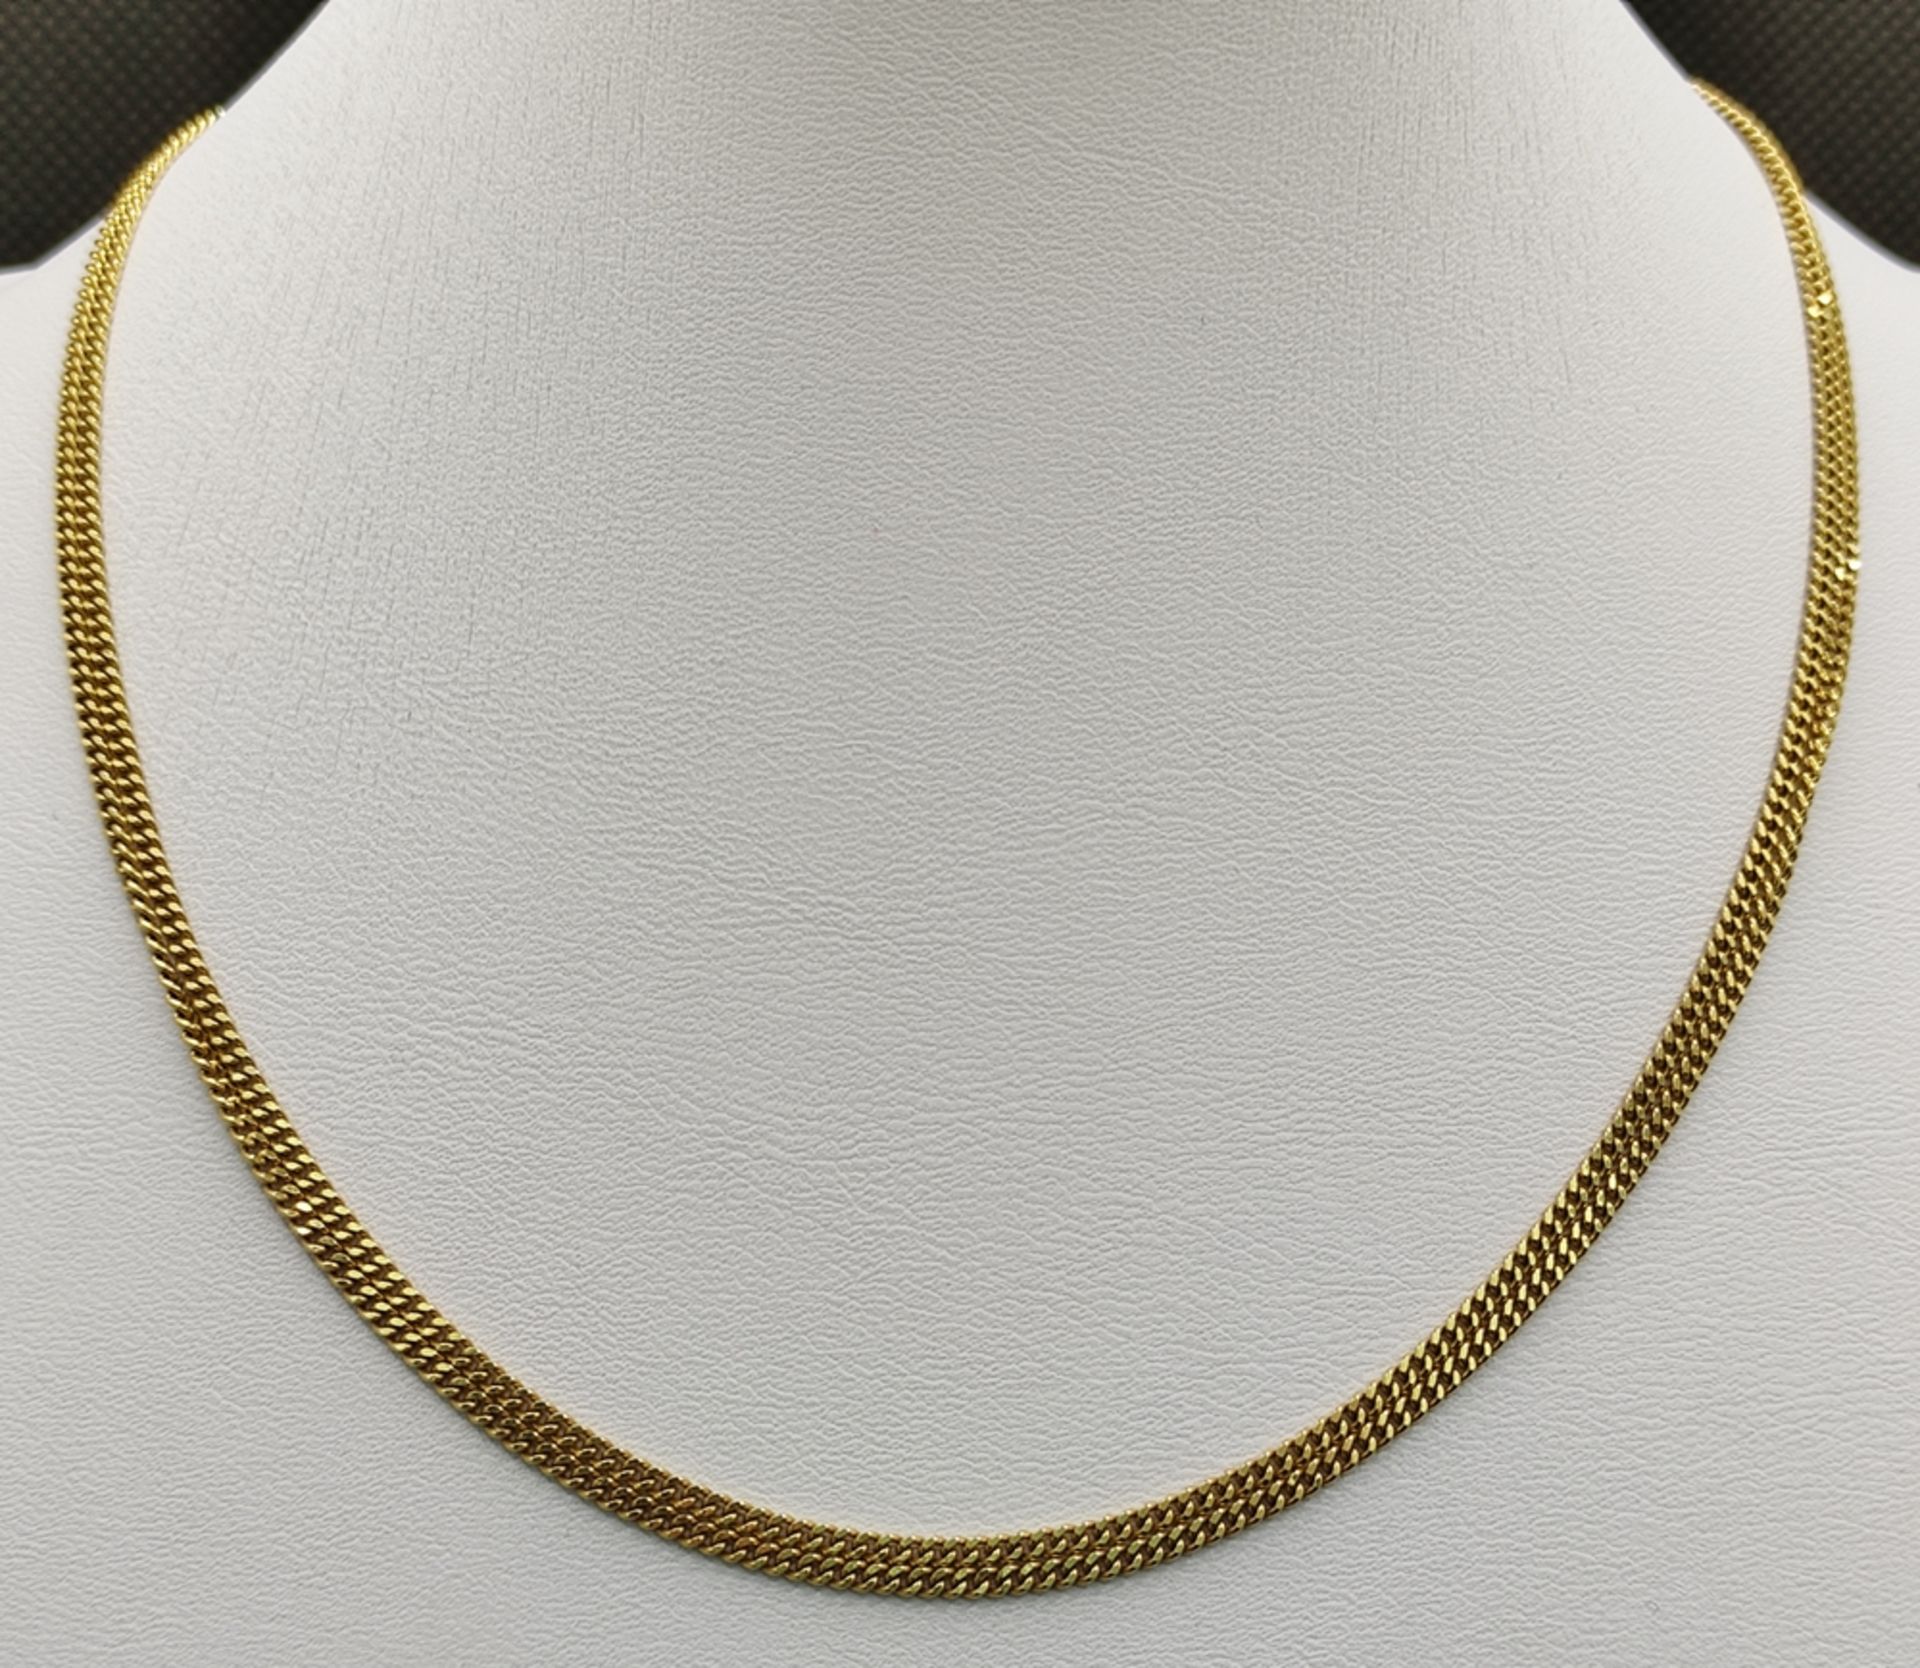 Fine curb chain, ring clasp, FBM, 585/14K yellow gold, 8g, length 80cm - Image 2 of 3